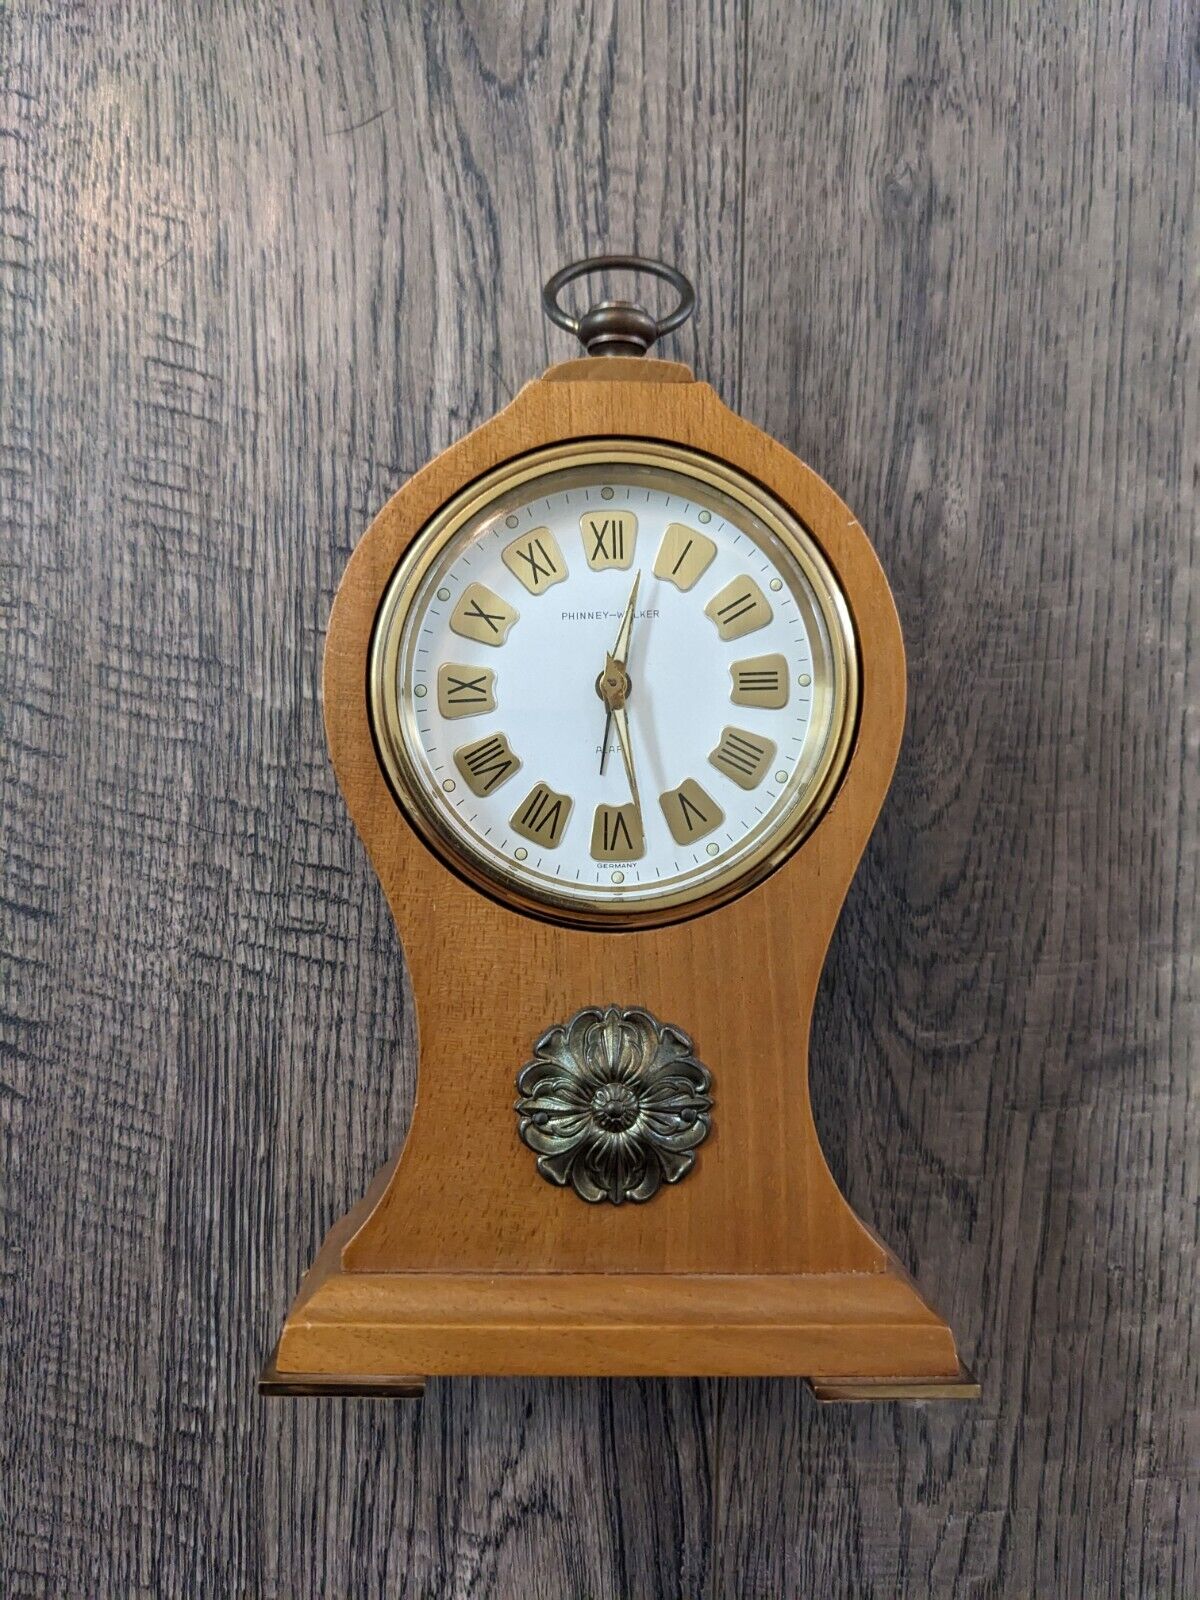 Vintage Phinney Walker Mid-Century Clock Wood And Brass Wind Up Works